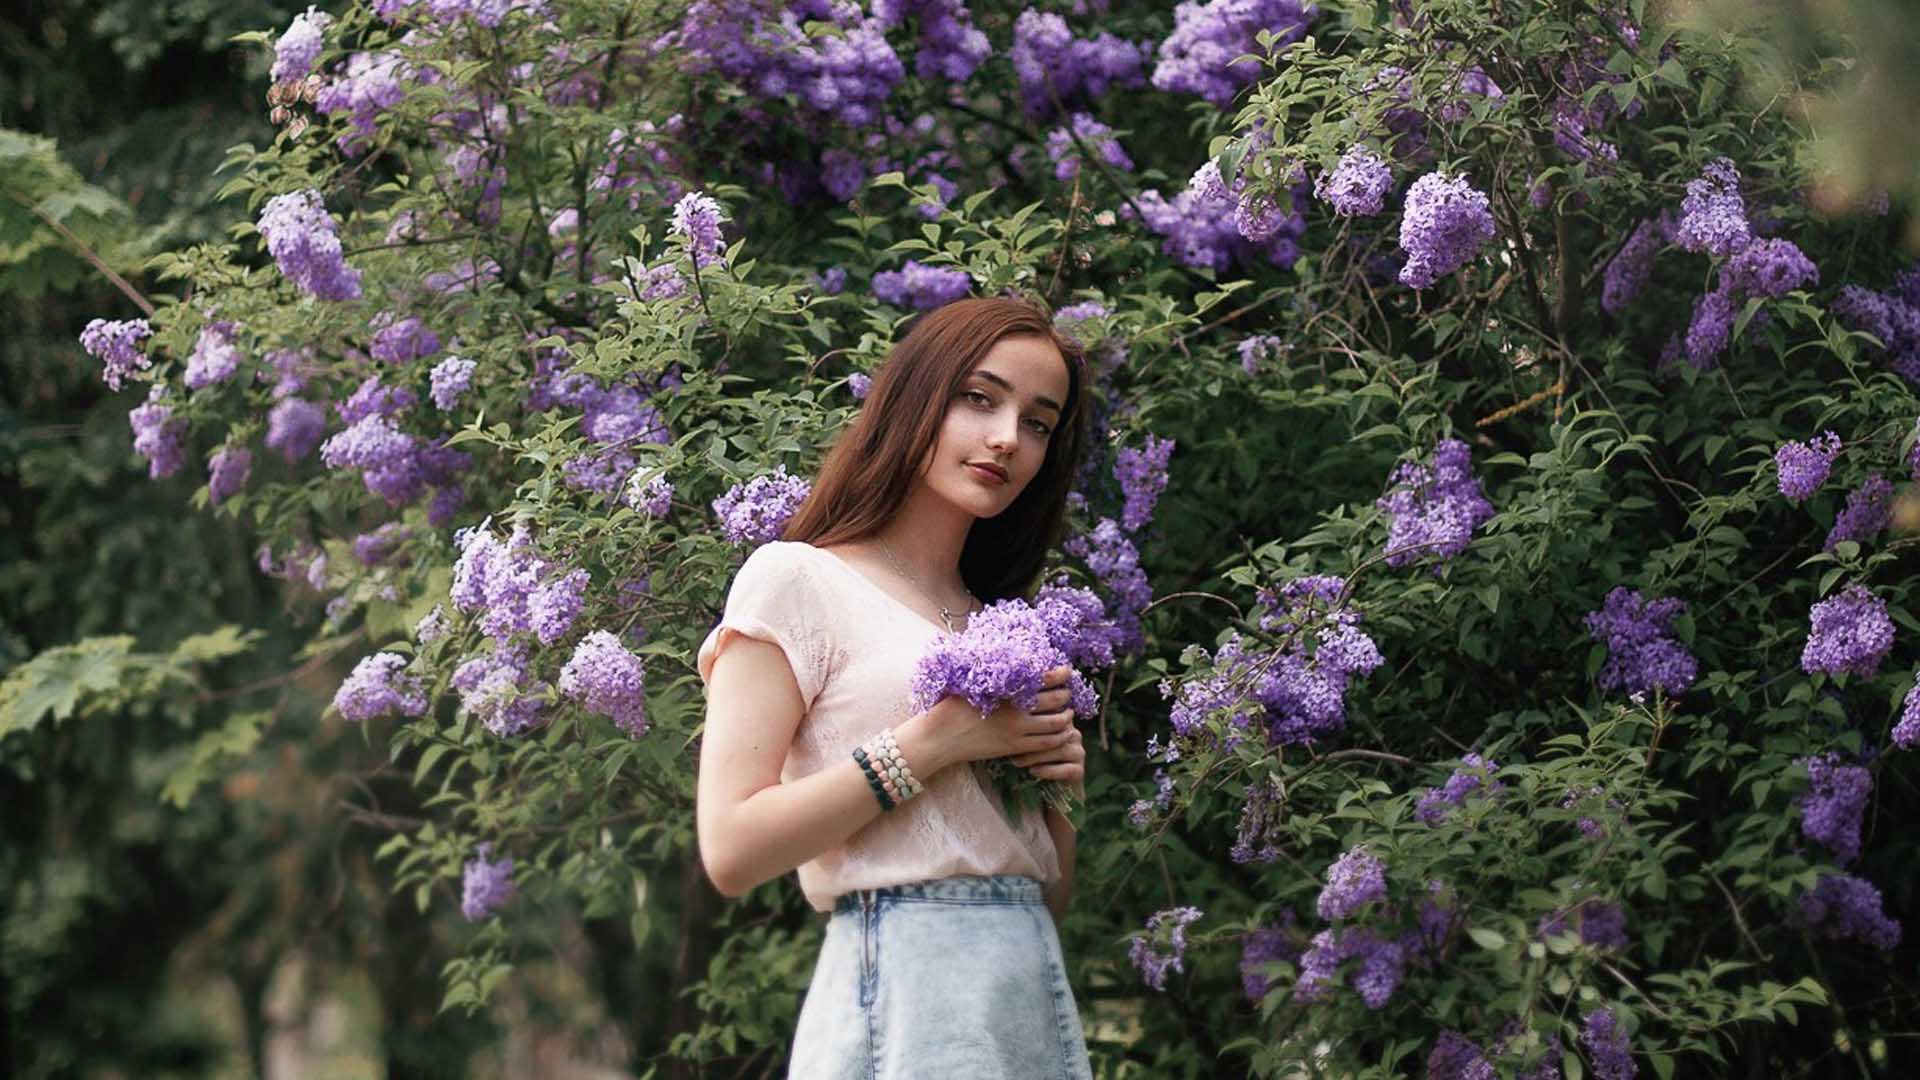 Girl Model With Purple Flowers Is Wearing Light Pink Tops And Jeans Skirt Standing Near Flowers Trees HD Girls